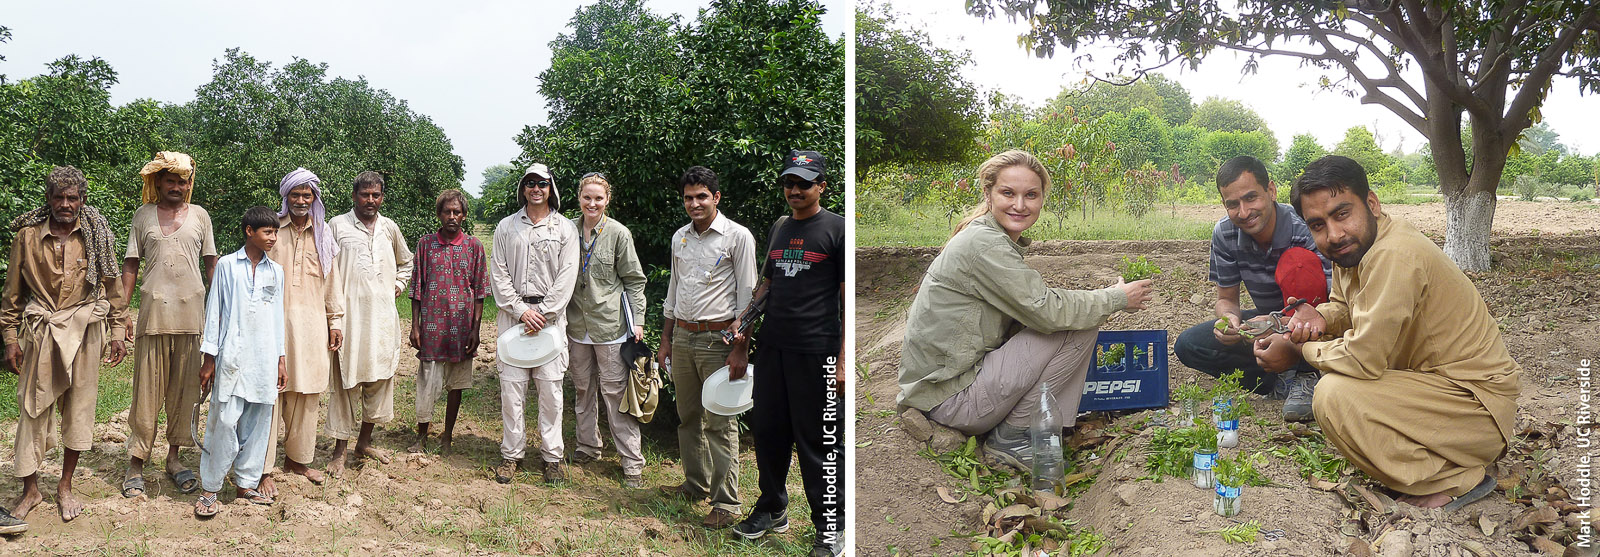 UC researchers collaborated with researchers at the University of Agriculture, Faisalabad, in Punjab, Pakistan, to collect natural enemies of ACP. Left, fieldwork in some areas involved assistance from citrus farmers. Right, at the university citrus research orchard, Christina Hoddle (left) processed ACP-infested citrus cuttings before taking them to a lab to rear the parasitoids; here, she is working with students Shouket Zaman Khan (back center) and Saif ur Rehman (right front).